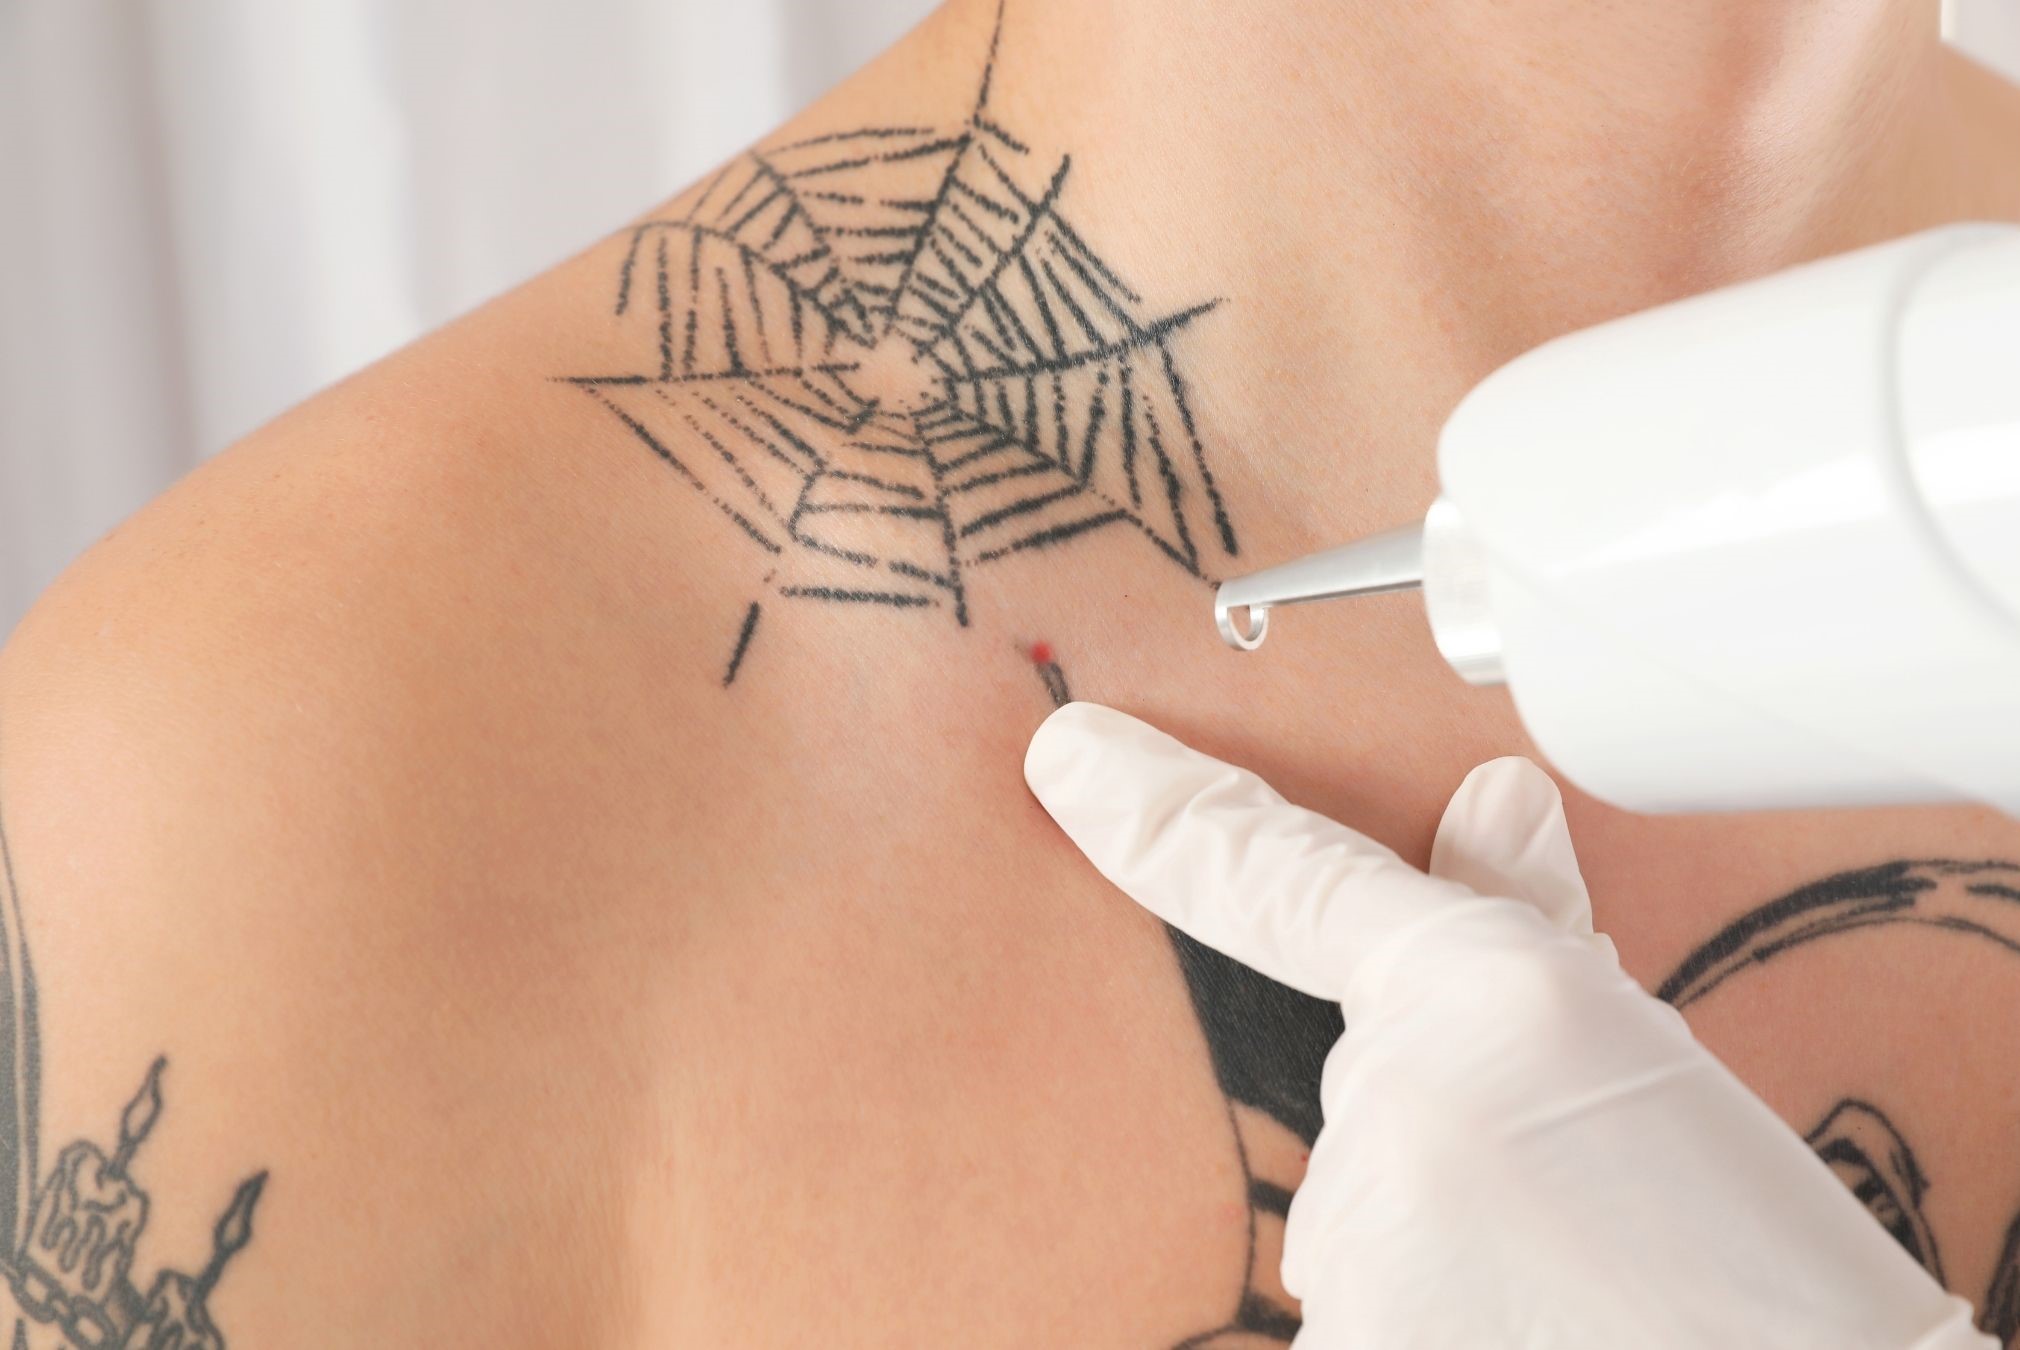 Factors that Influence Tattoo Removal Success